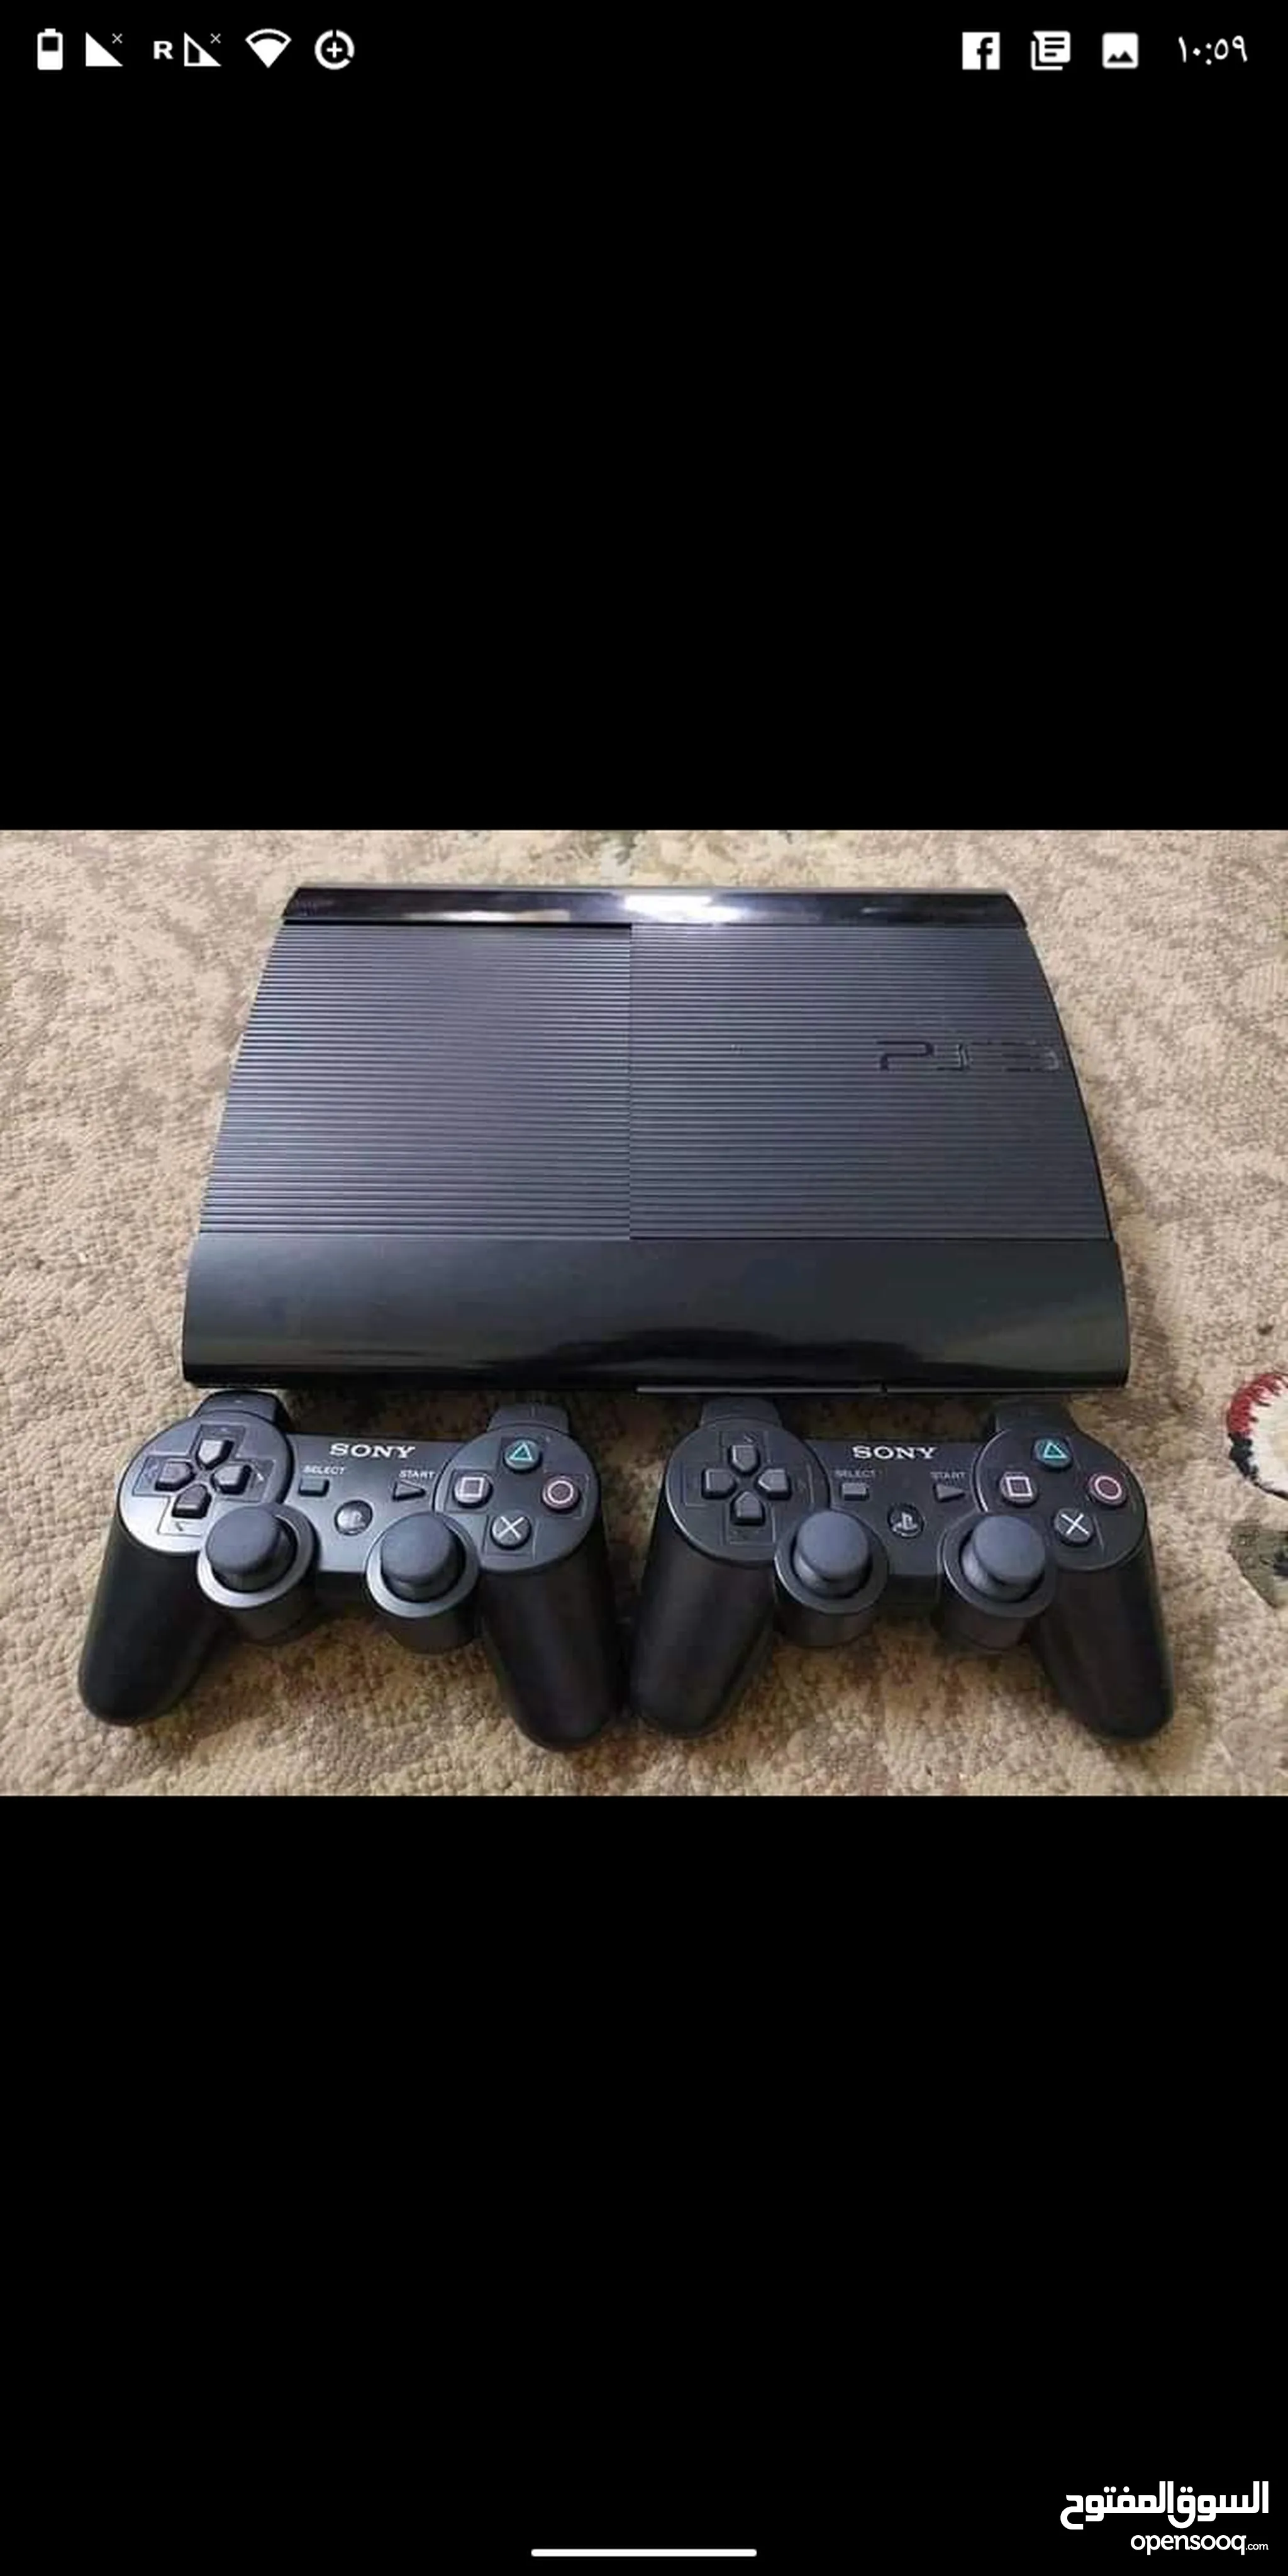 Playstation 3 For Sale in Kuwait : Used : Best Prices | OpenSooq